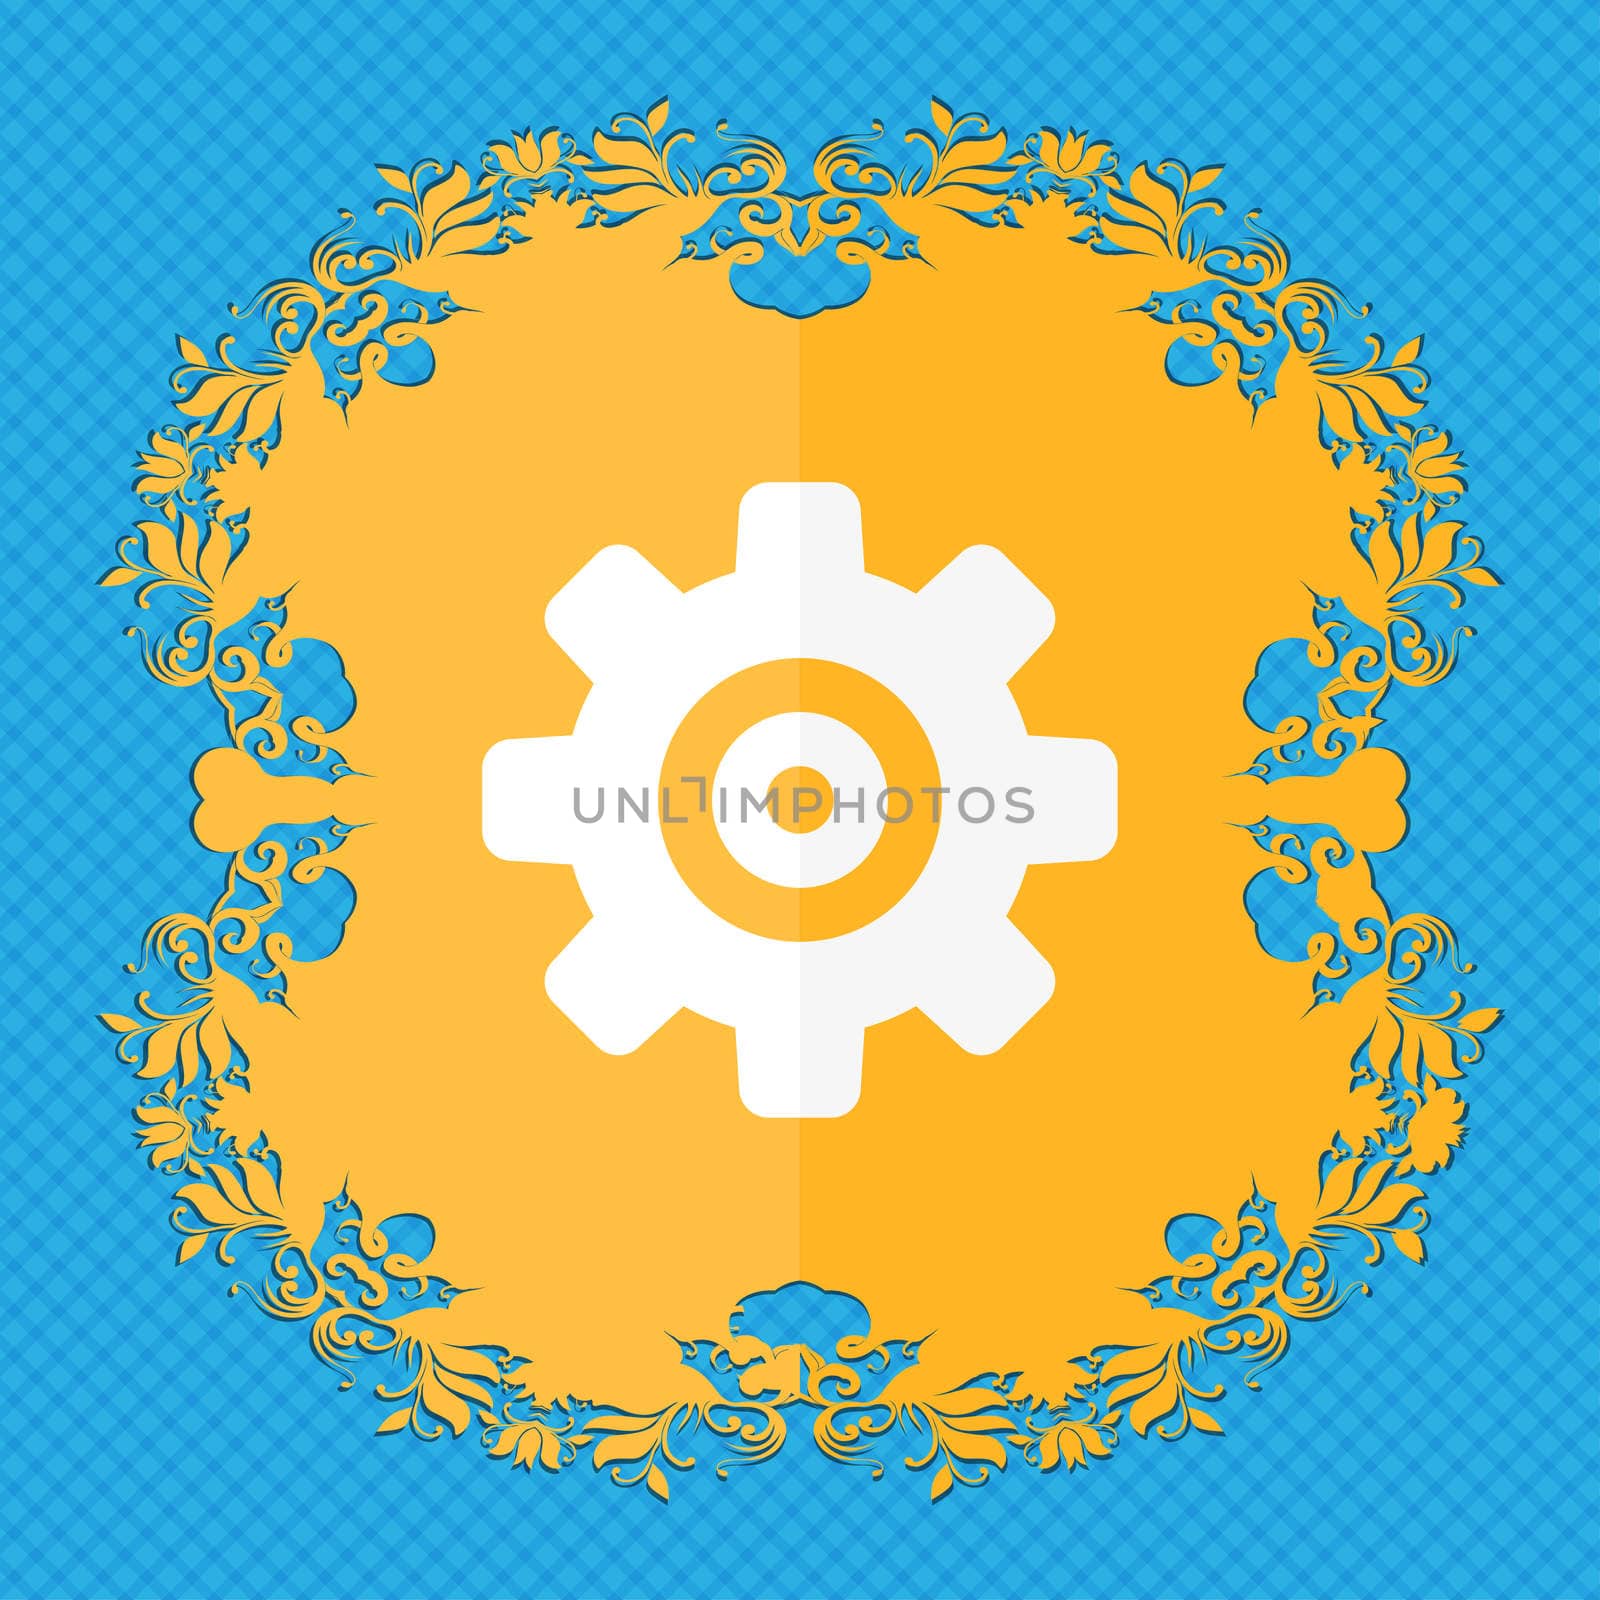 Cog settings, Cogwheel gear mechanism . Floral flat design on a blue abstract background with place for your text. illustration